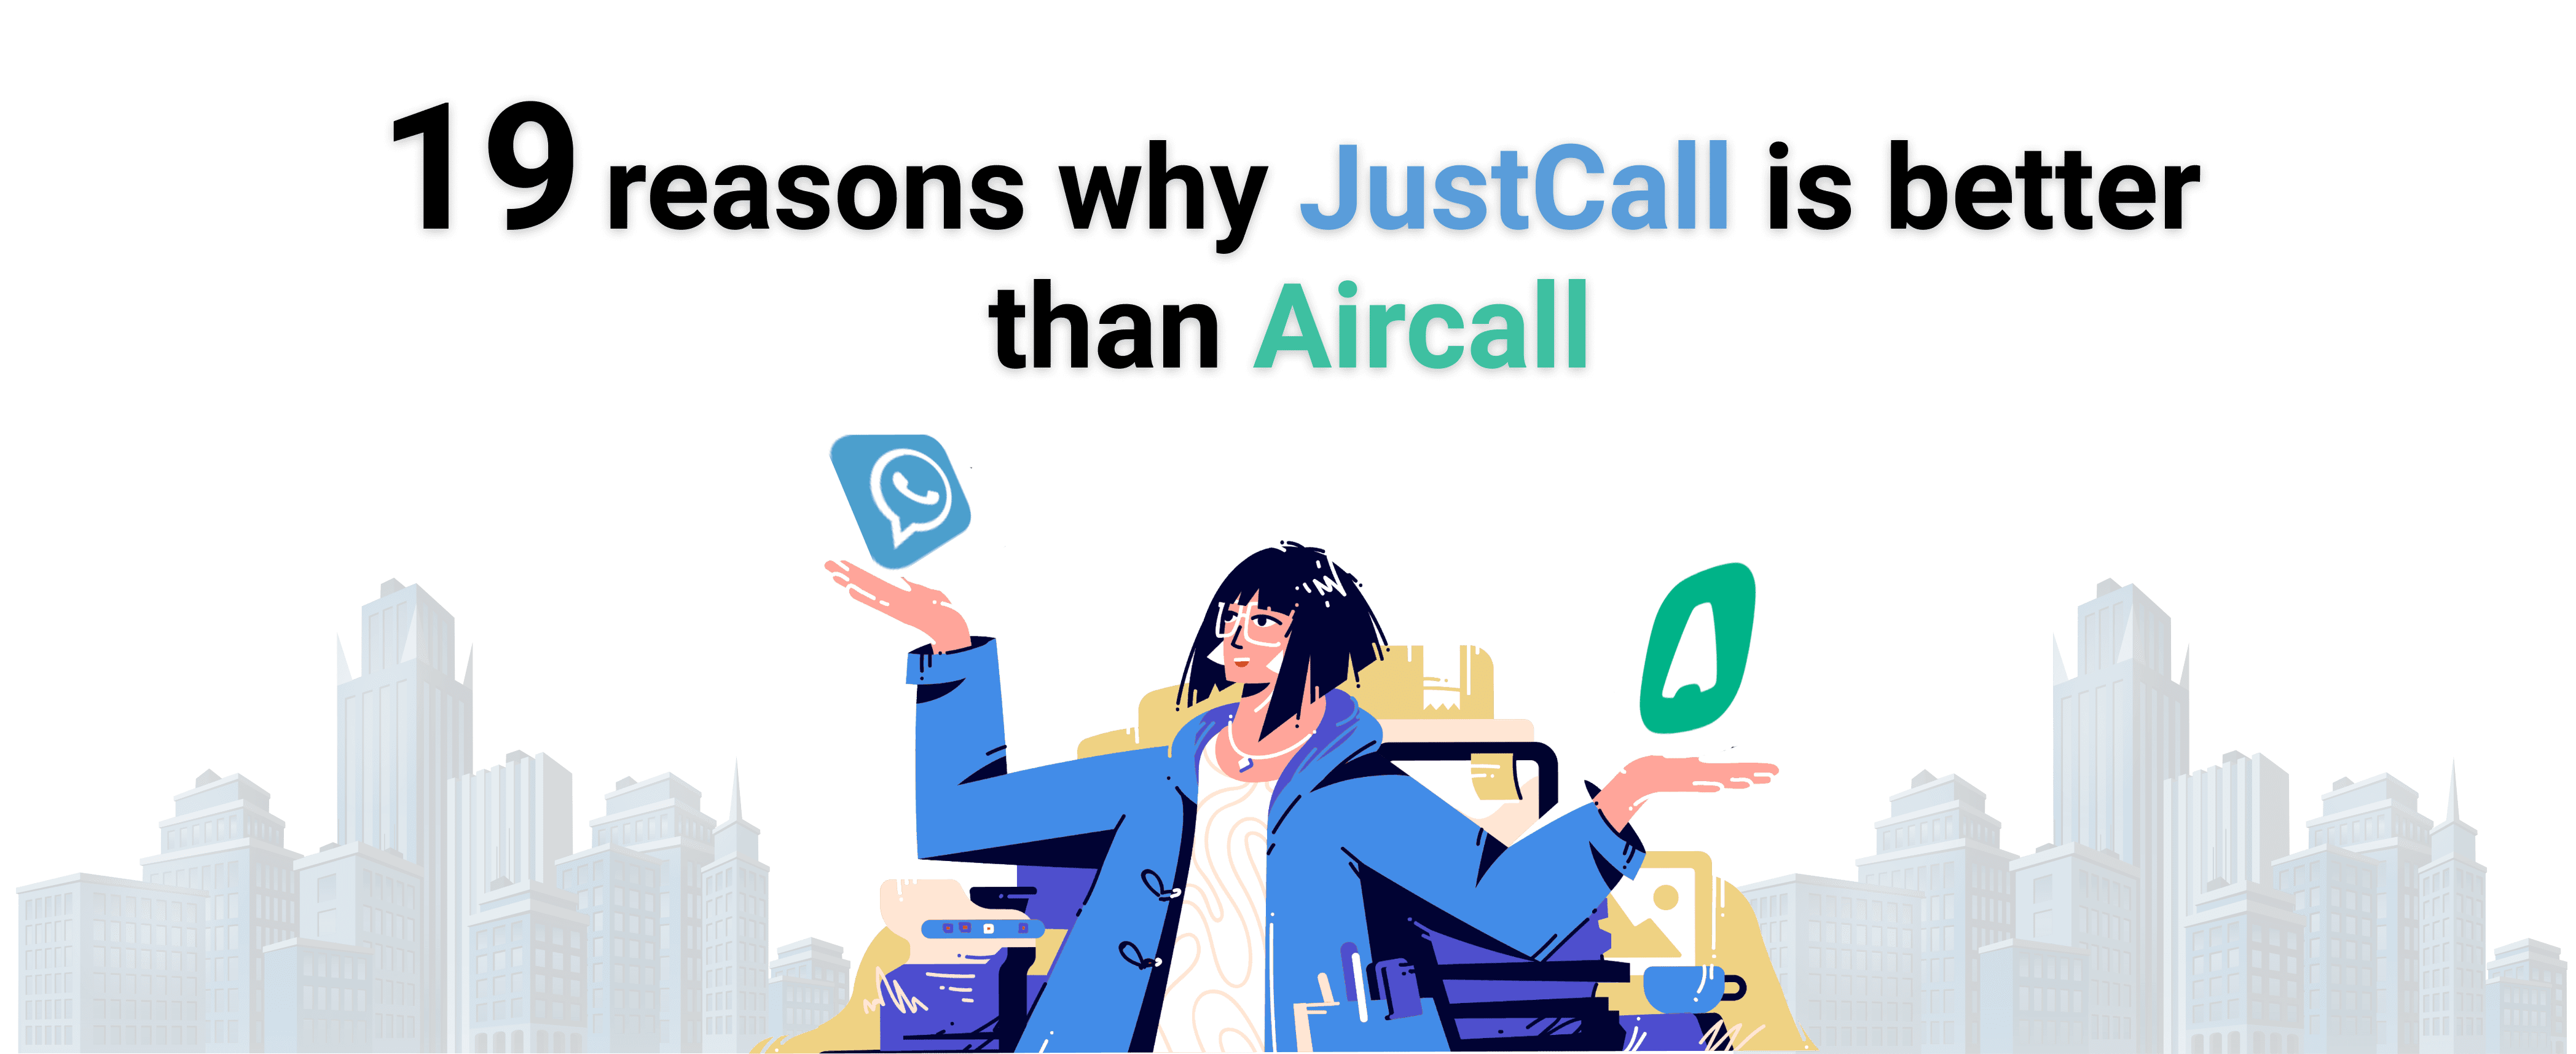 Why-JustCall-better-than-Aircall